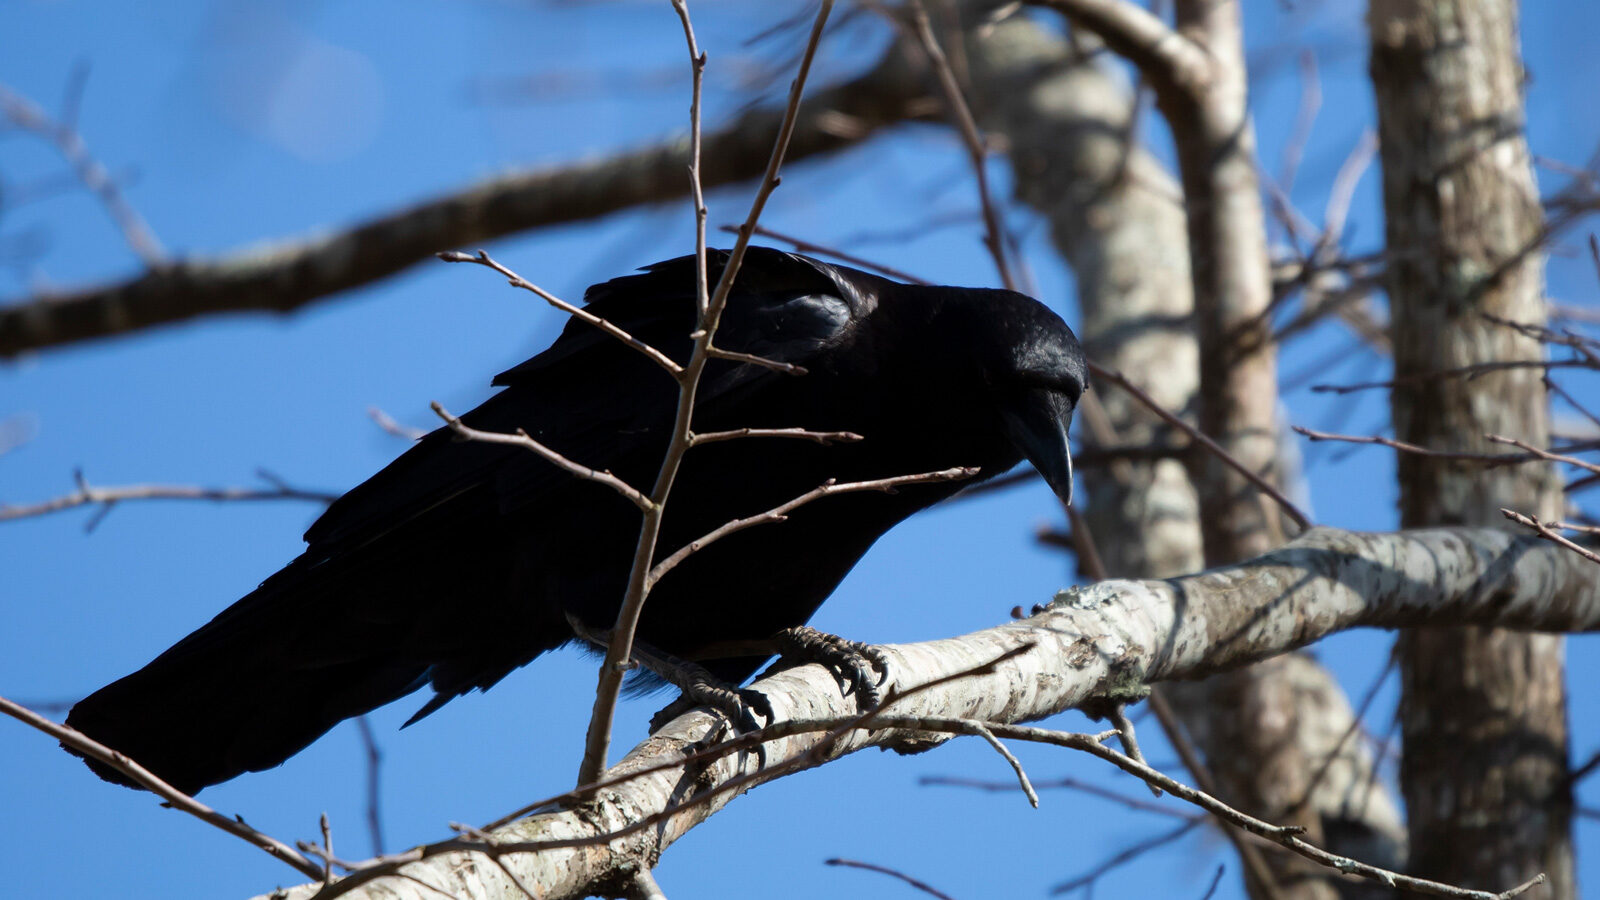 Fish crow looking down